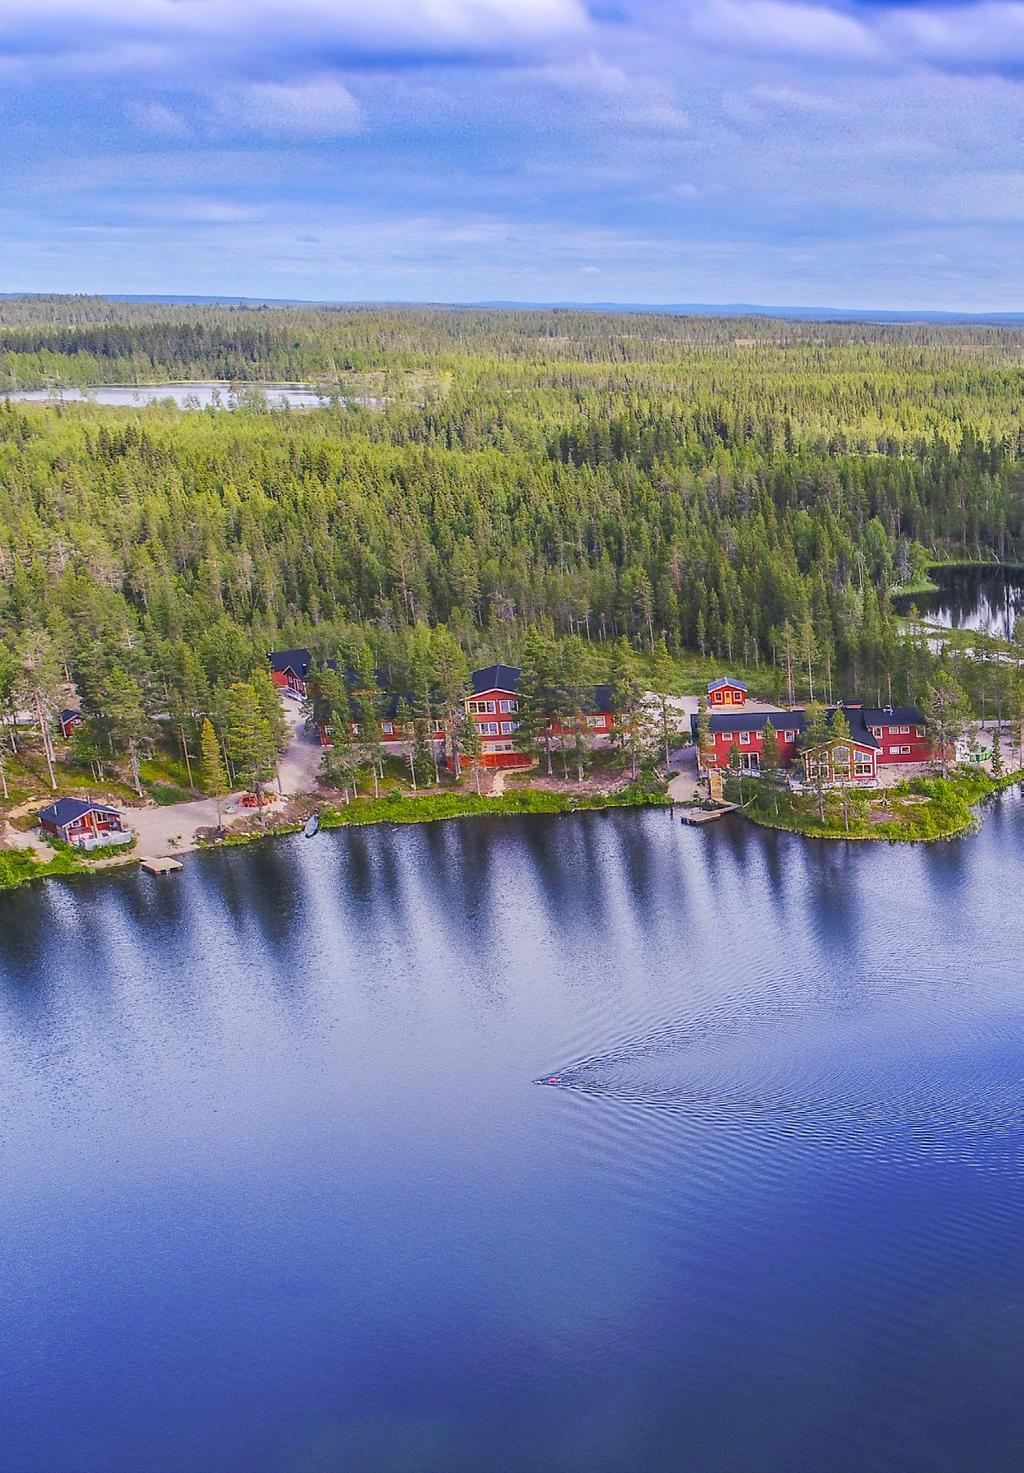 Explore the North SUMMER & FALL IN LAPLAND 2018 ACCOMMODATION & ACTIVITIES